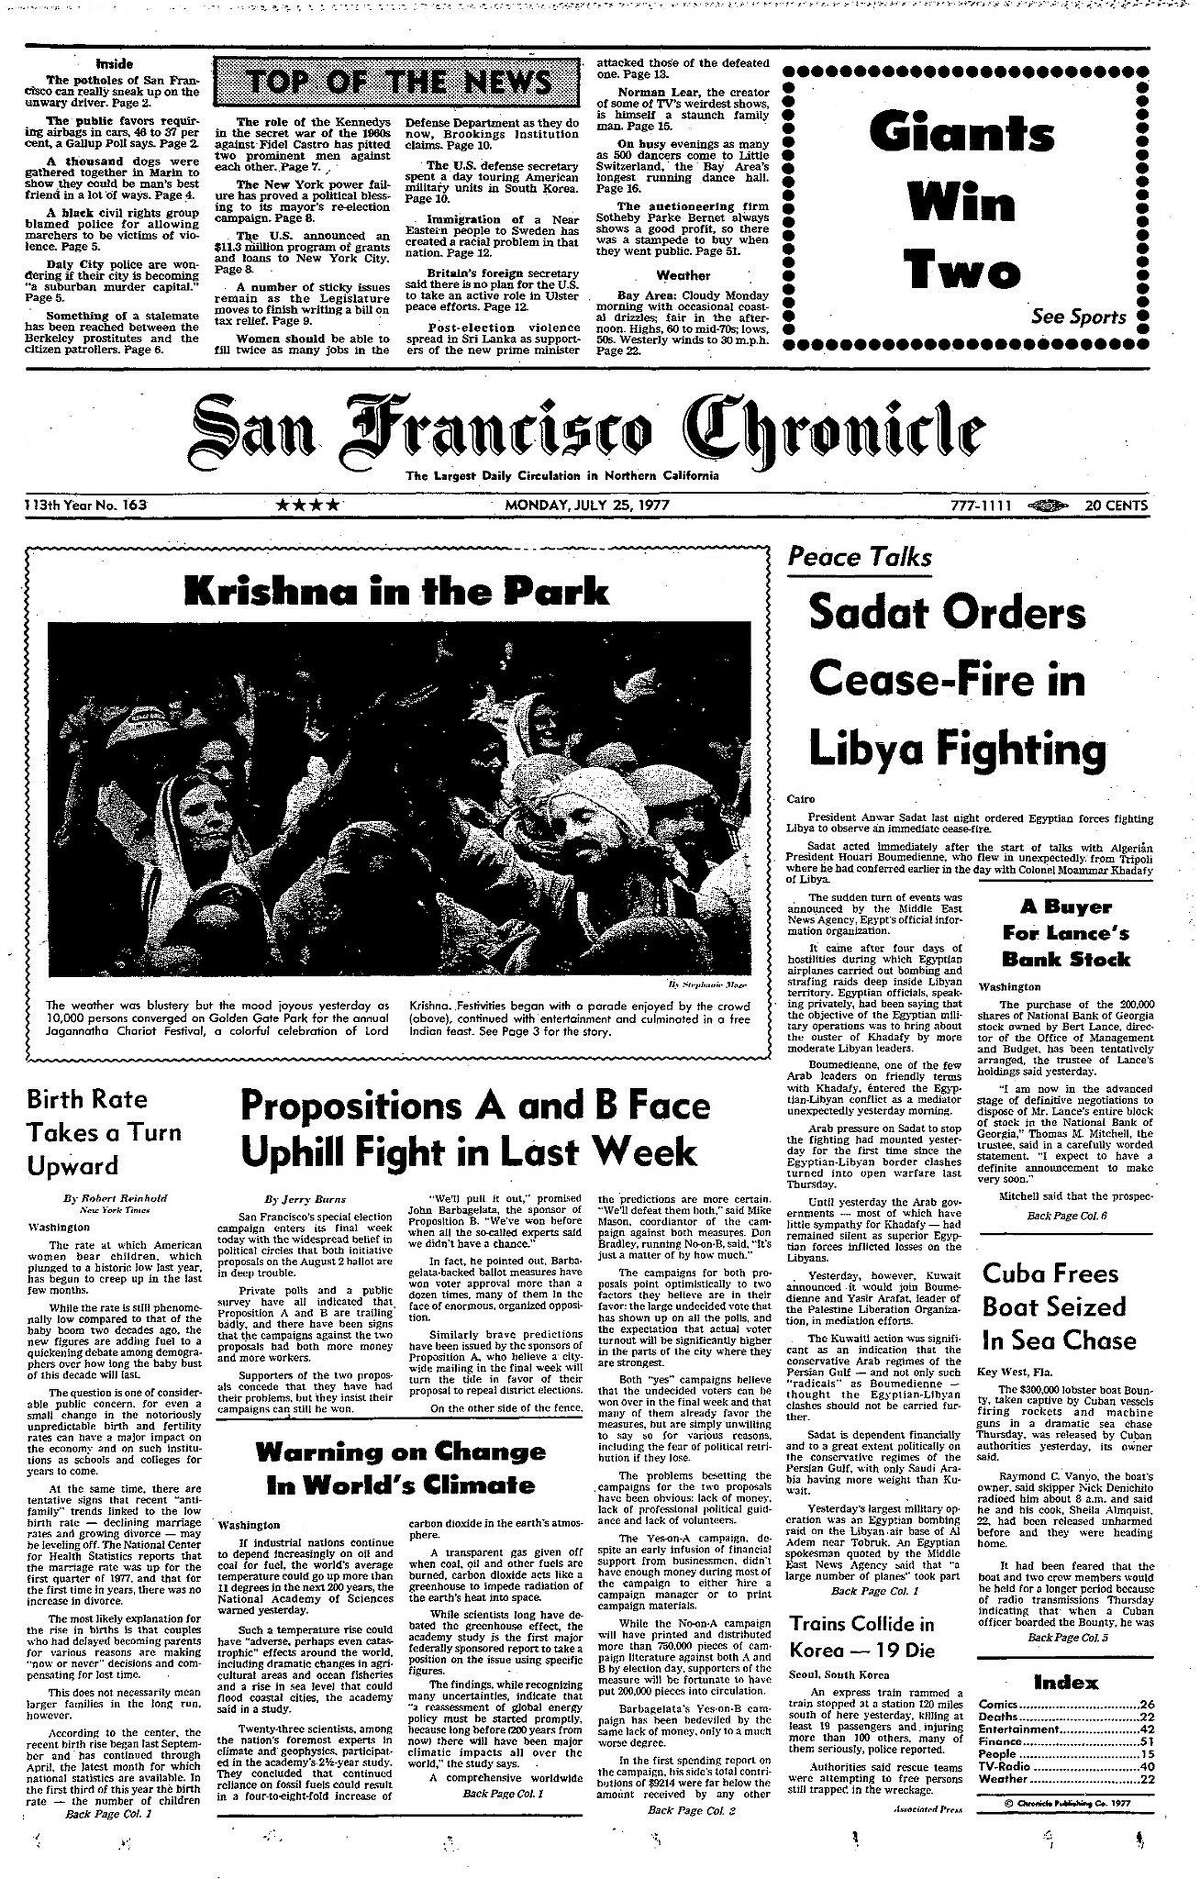 Historic Chronicle Front Page July 25, 1977 Hare Krishna rally in the Golden Gate Park, and early warning on climate change Chron365, Chroncover